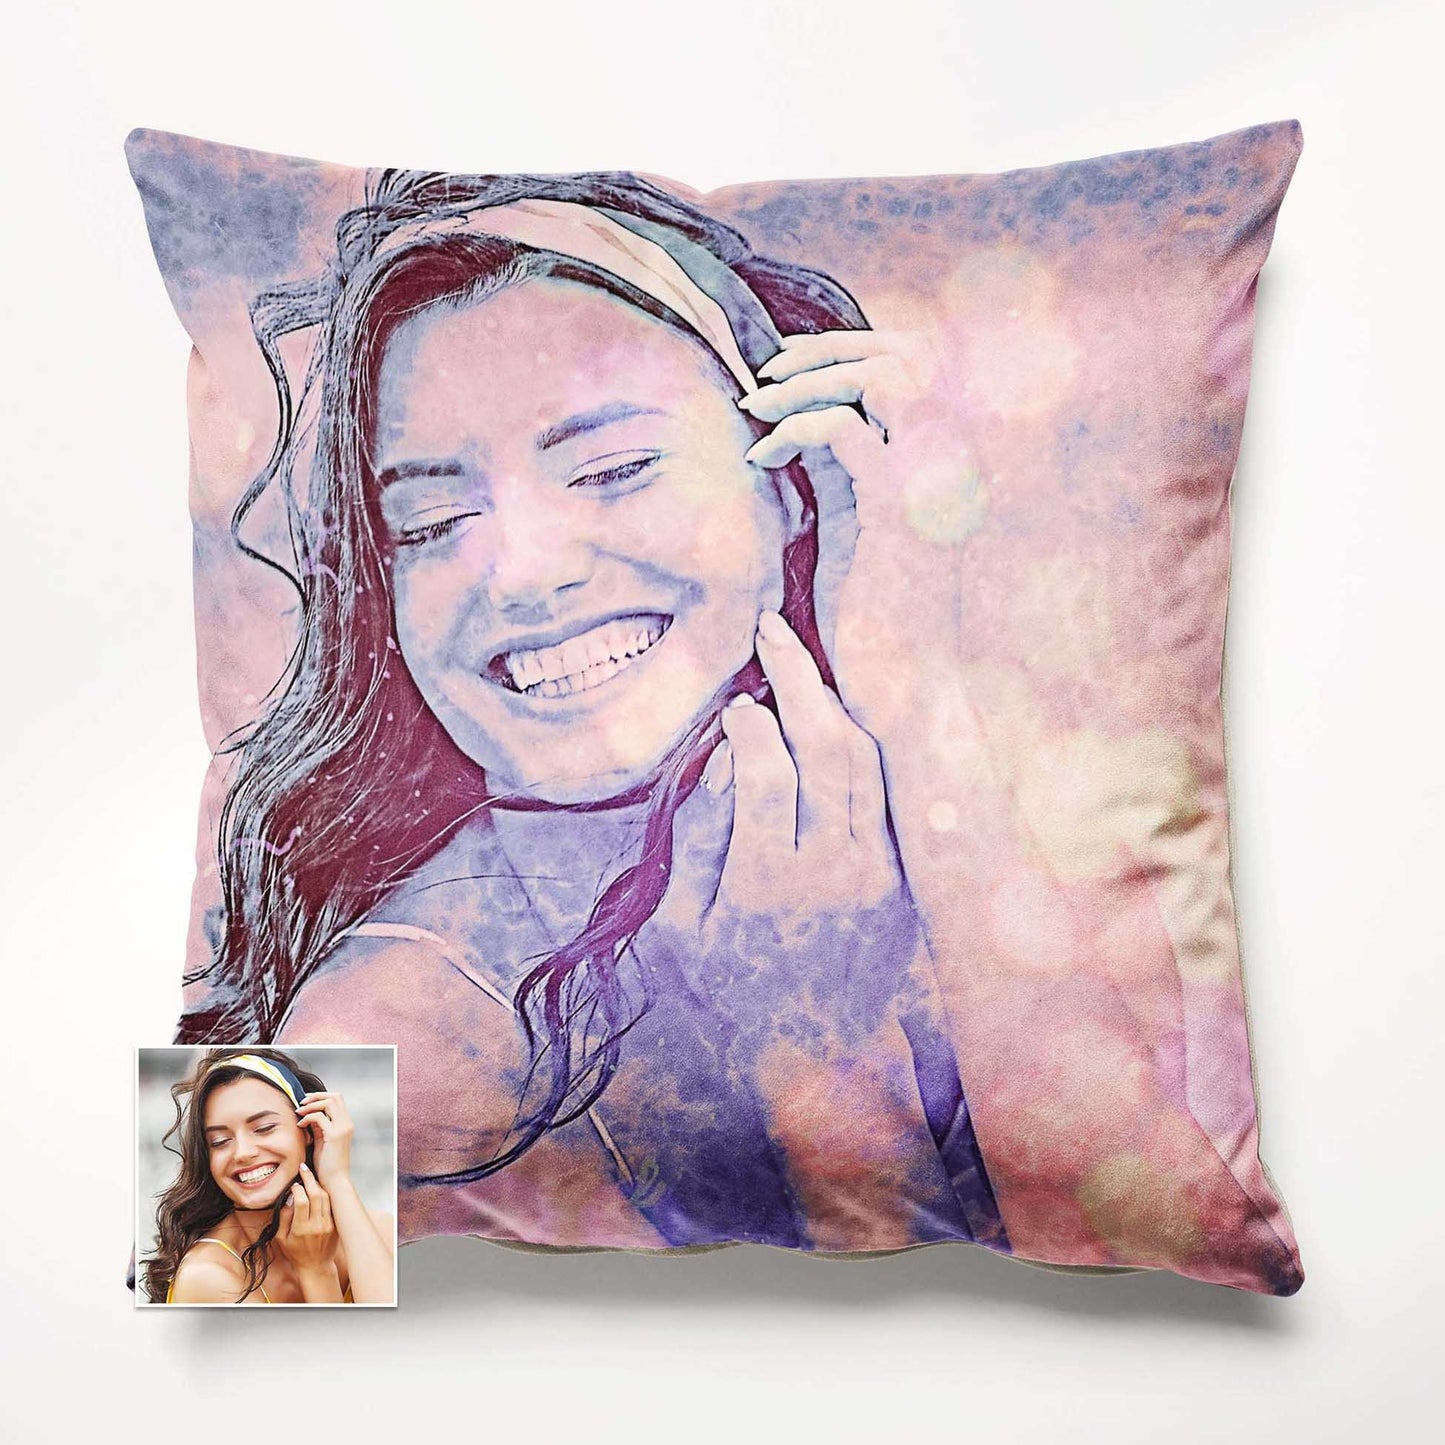 The Personalised Special Purple FX Cushion is a custom-made masterpiece, perfect for adding a unique and original touch to your home decor. With its vibrant and bright colors, it brings a fresh and cool vibe to any space